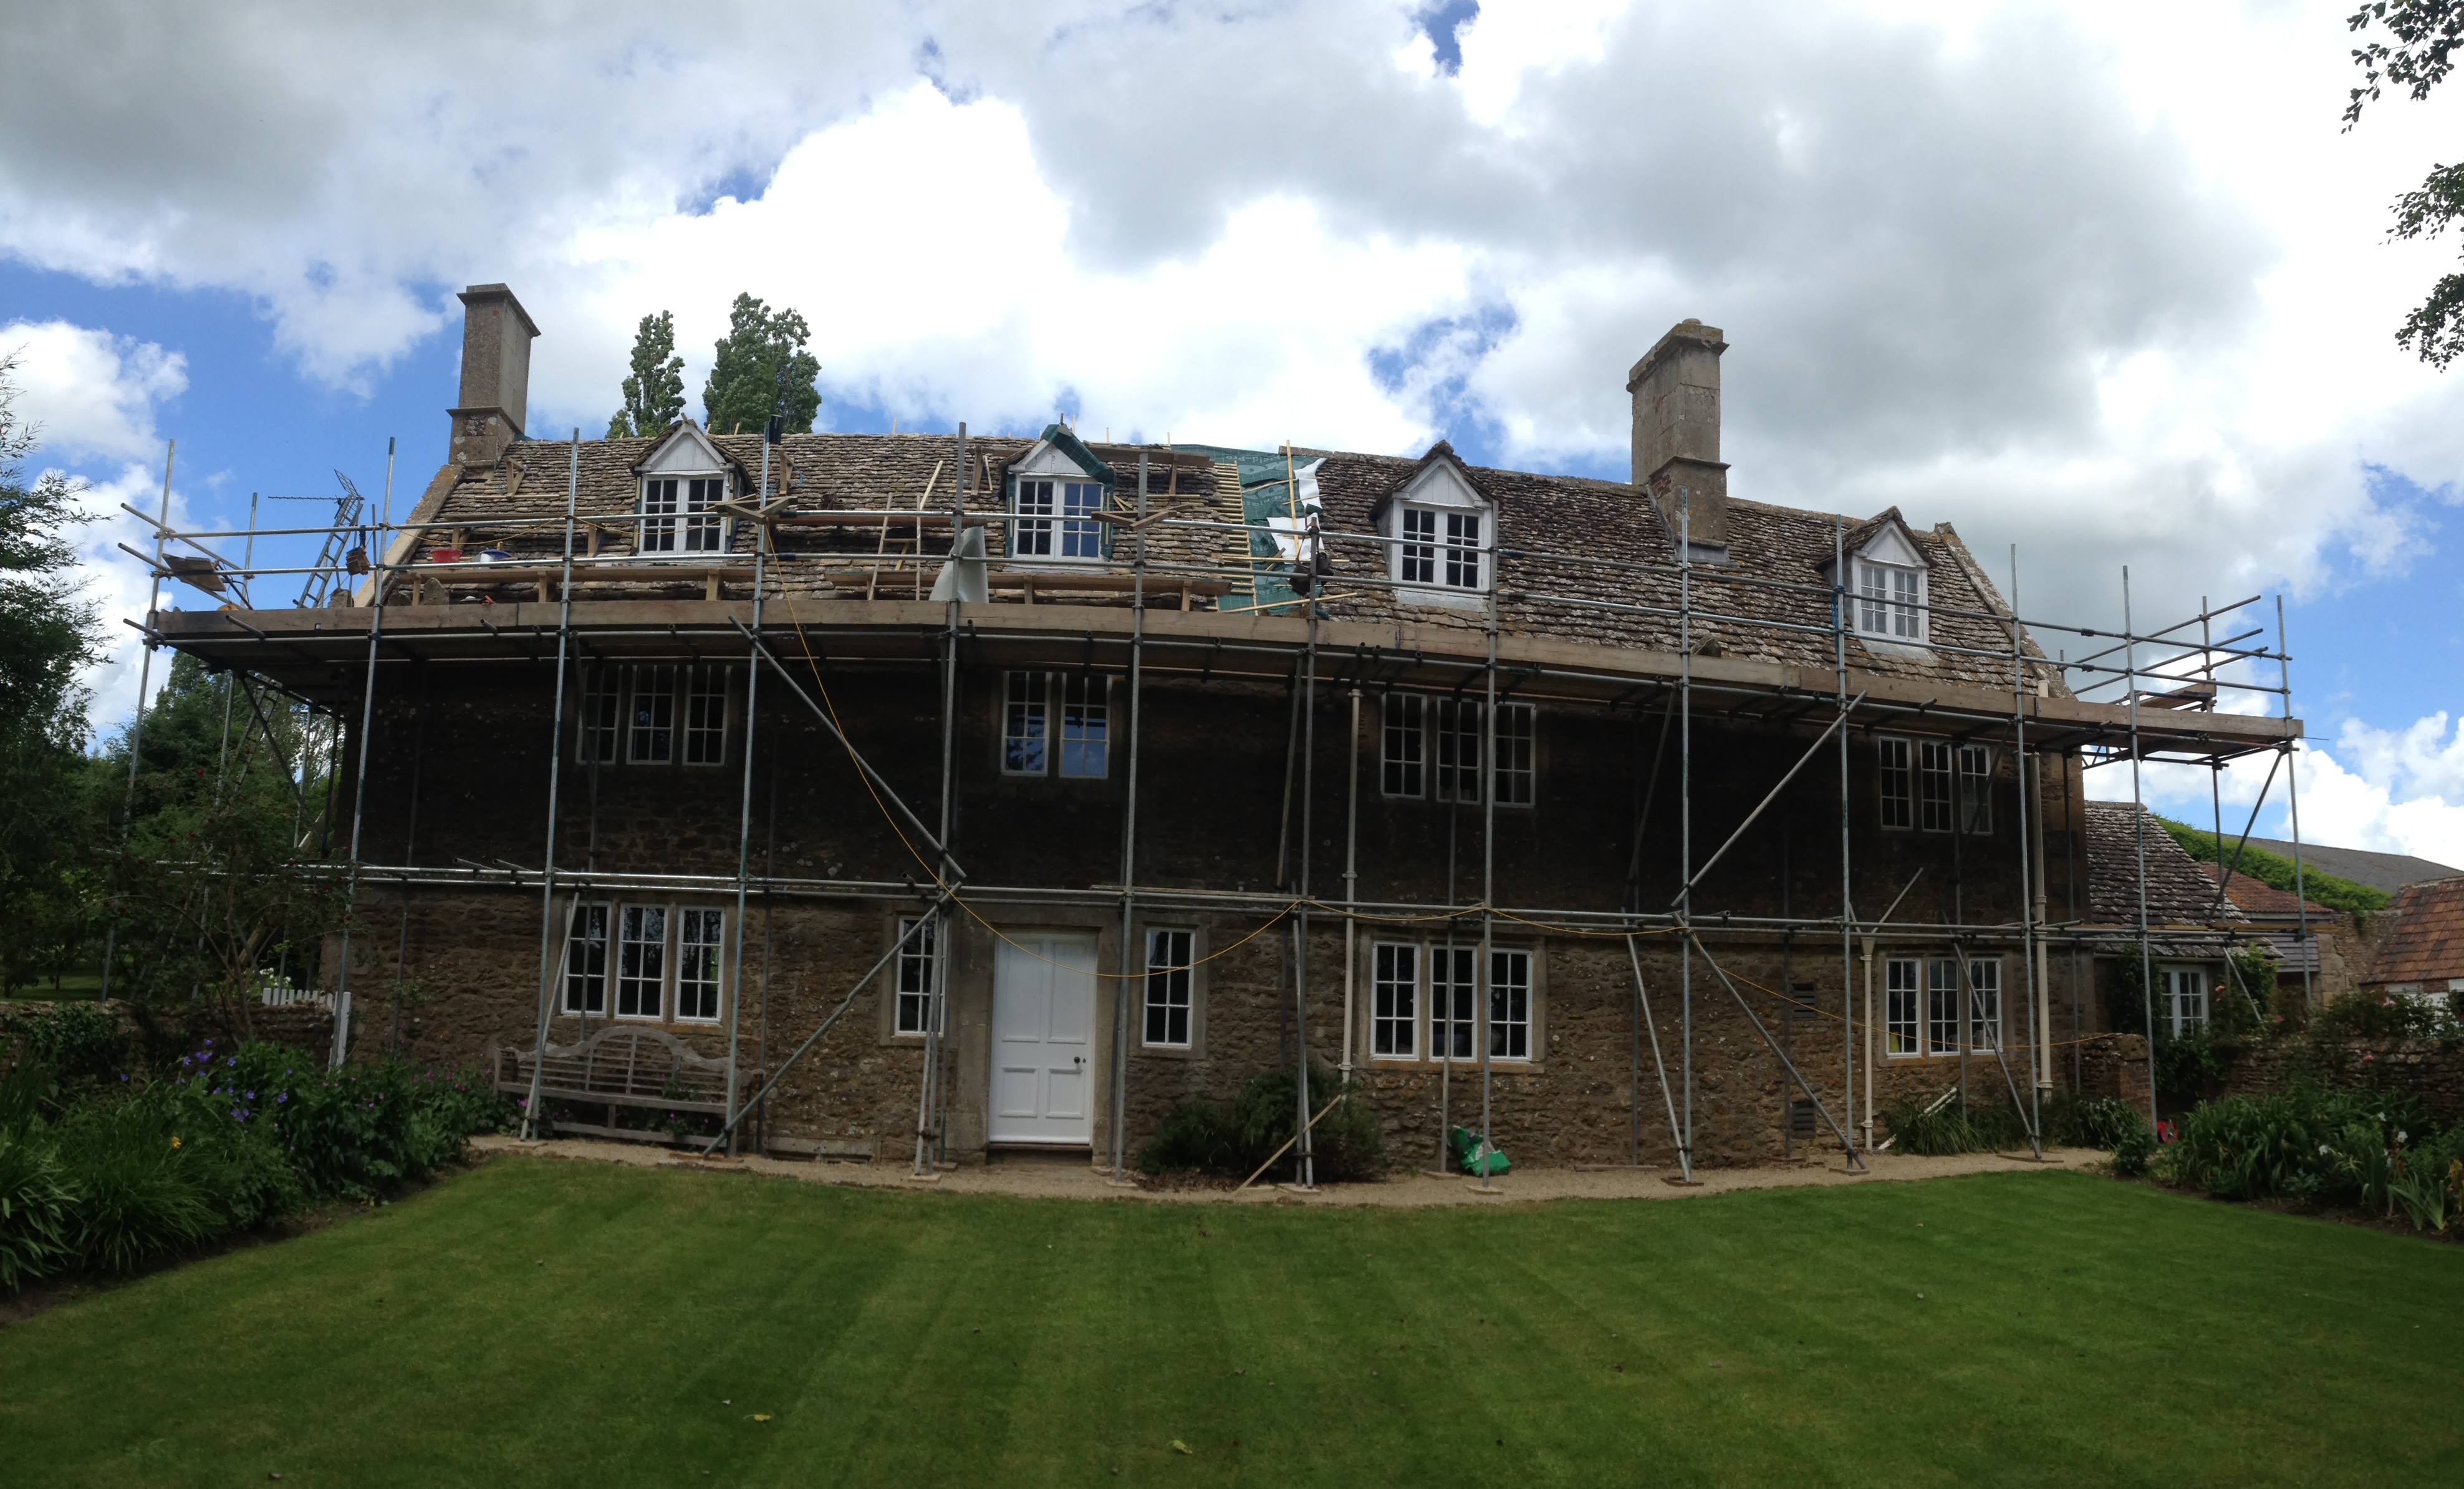 Cotswold stone roofing